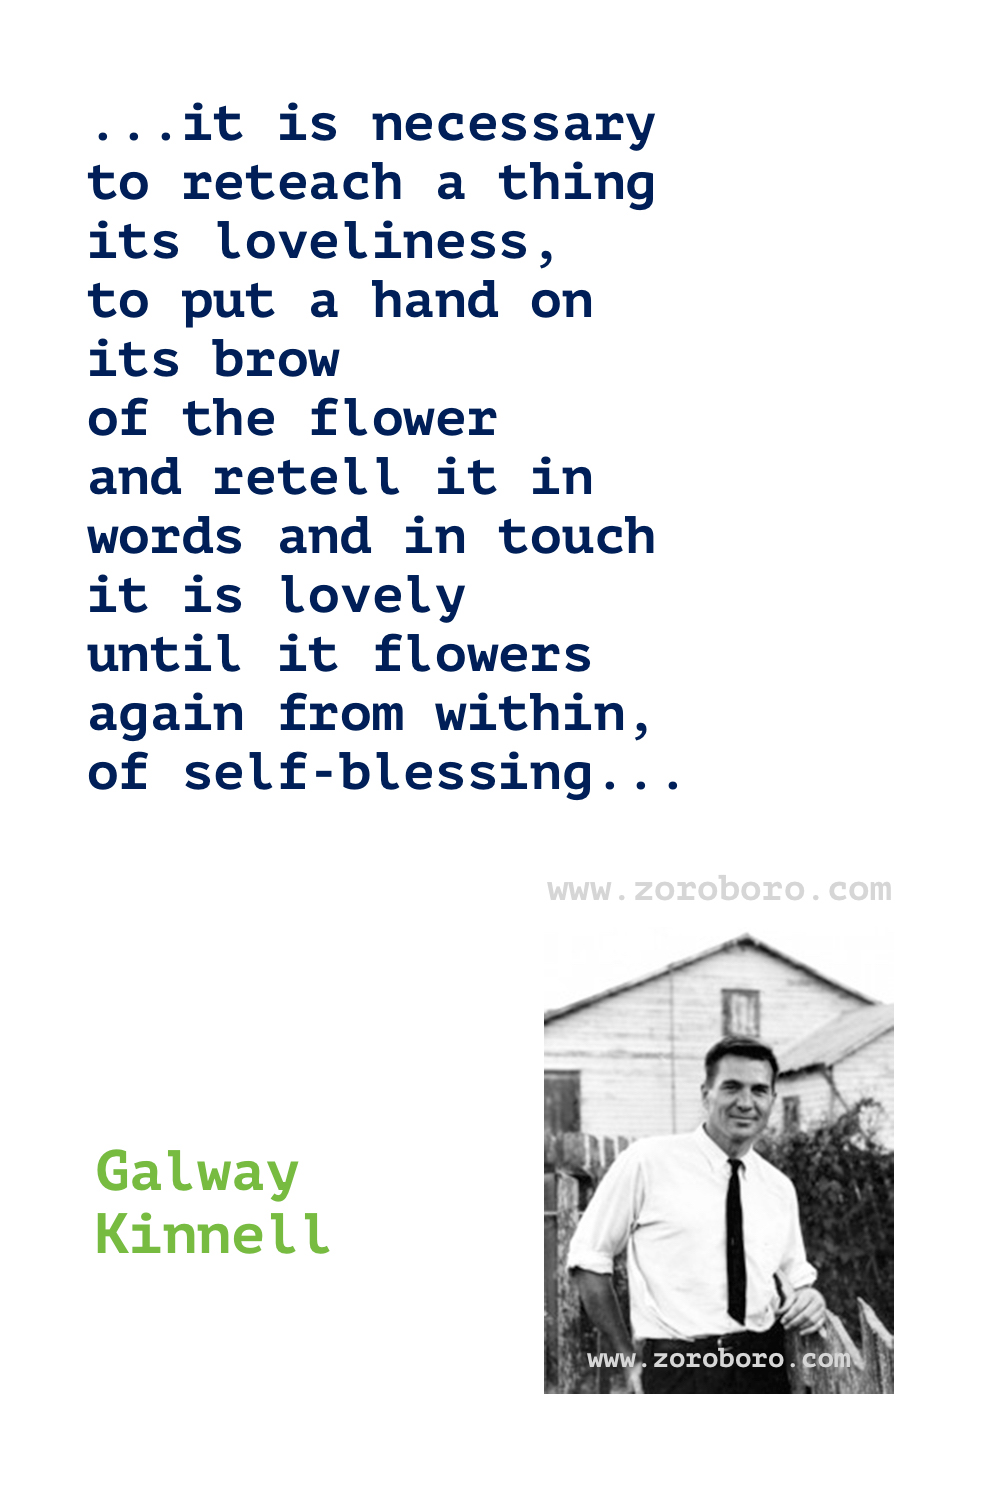 Galway Kinnell Quotes, Galway Kinnell Poems, Galway Kinnell Poetry, Galway Kinnell Books Quotes, Galway Kinnell.